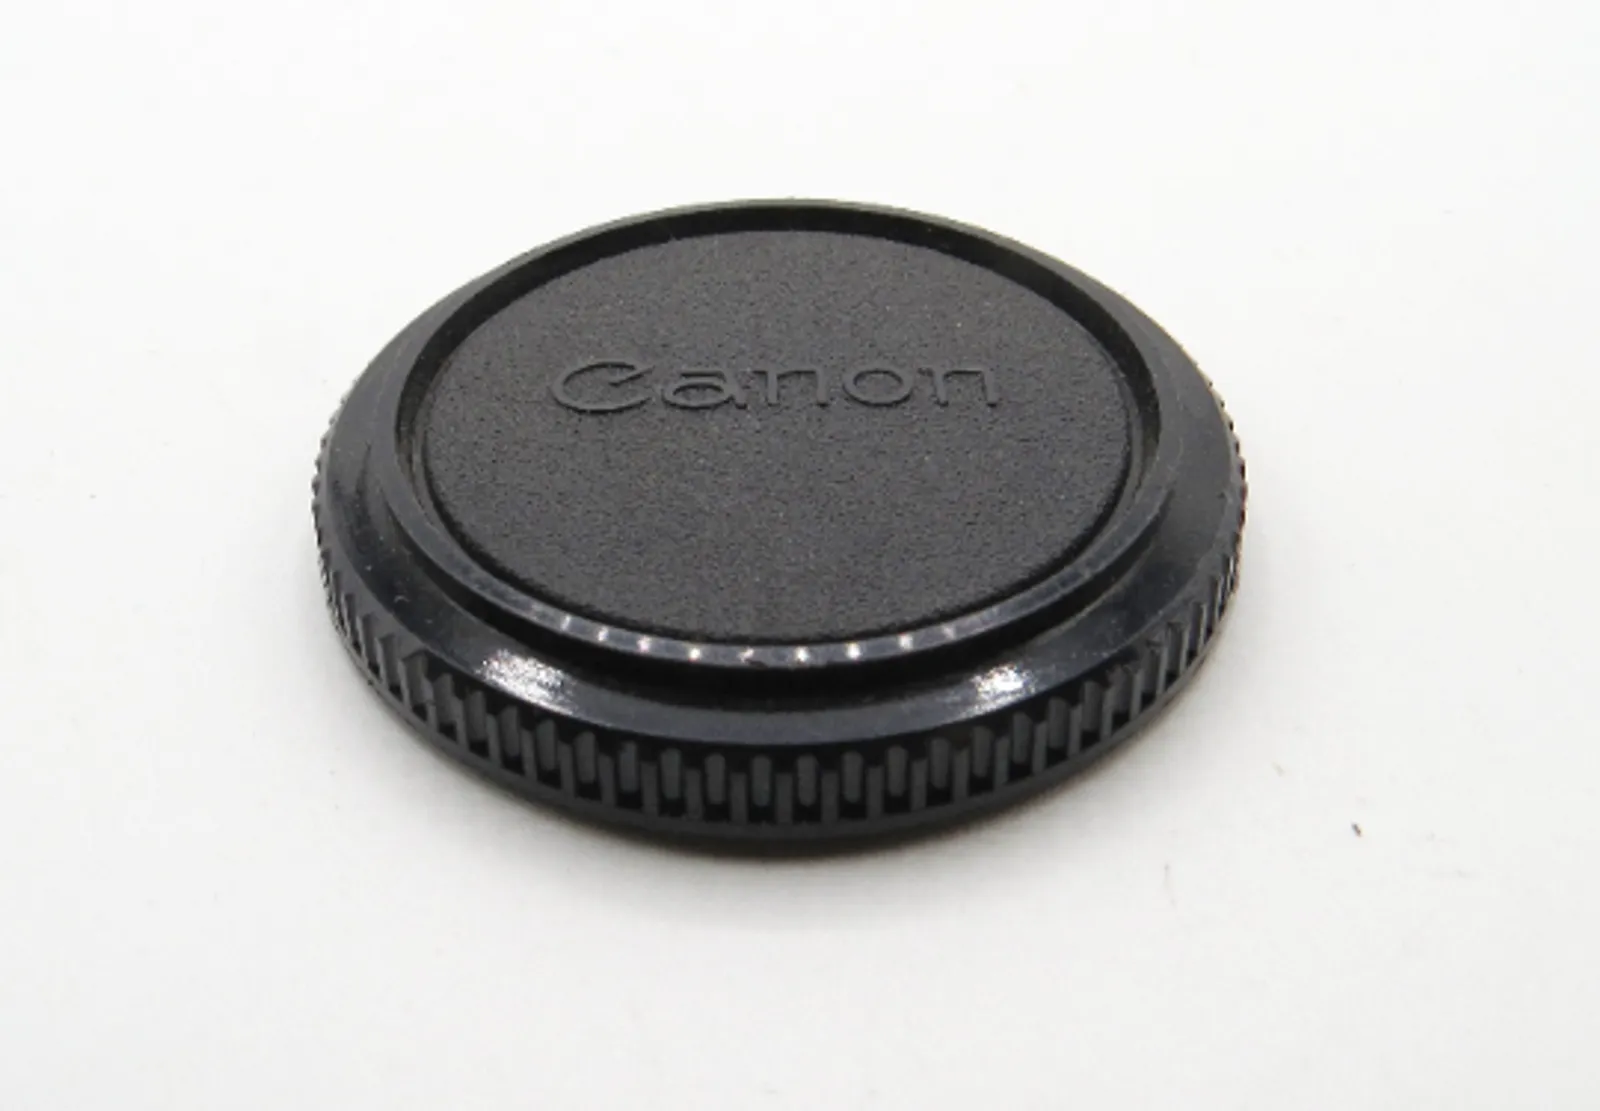 Vintage Canon Black Plastic Body Cap - Japan - Fits Canon AE-1 Camera - In Clean Condition 